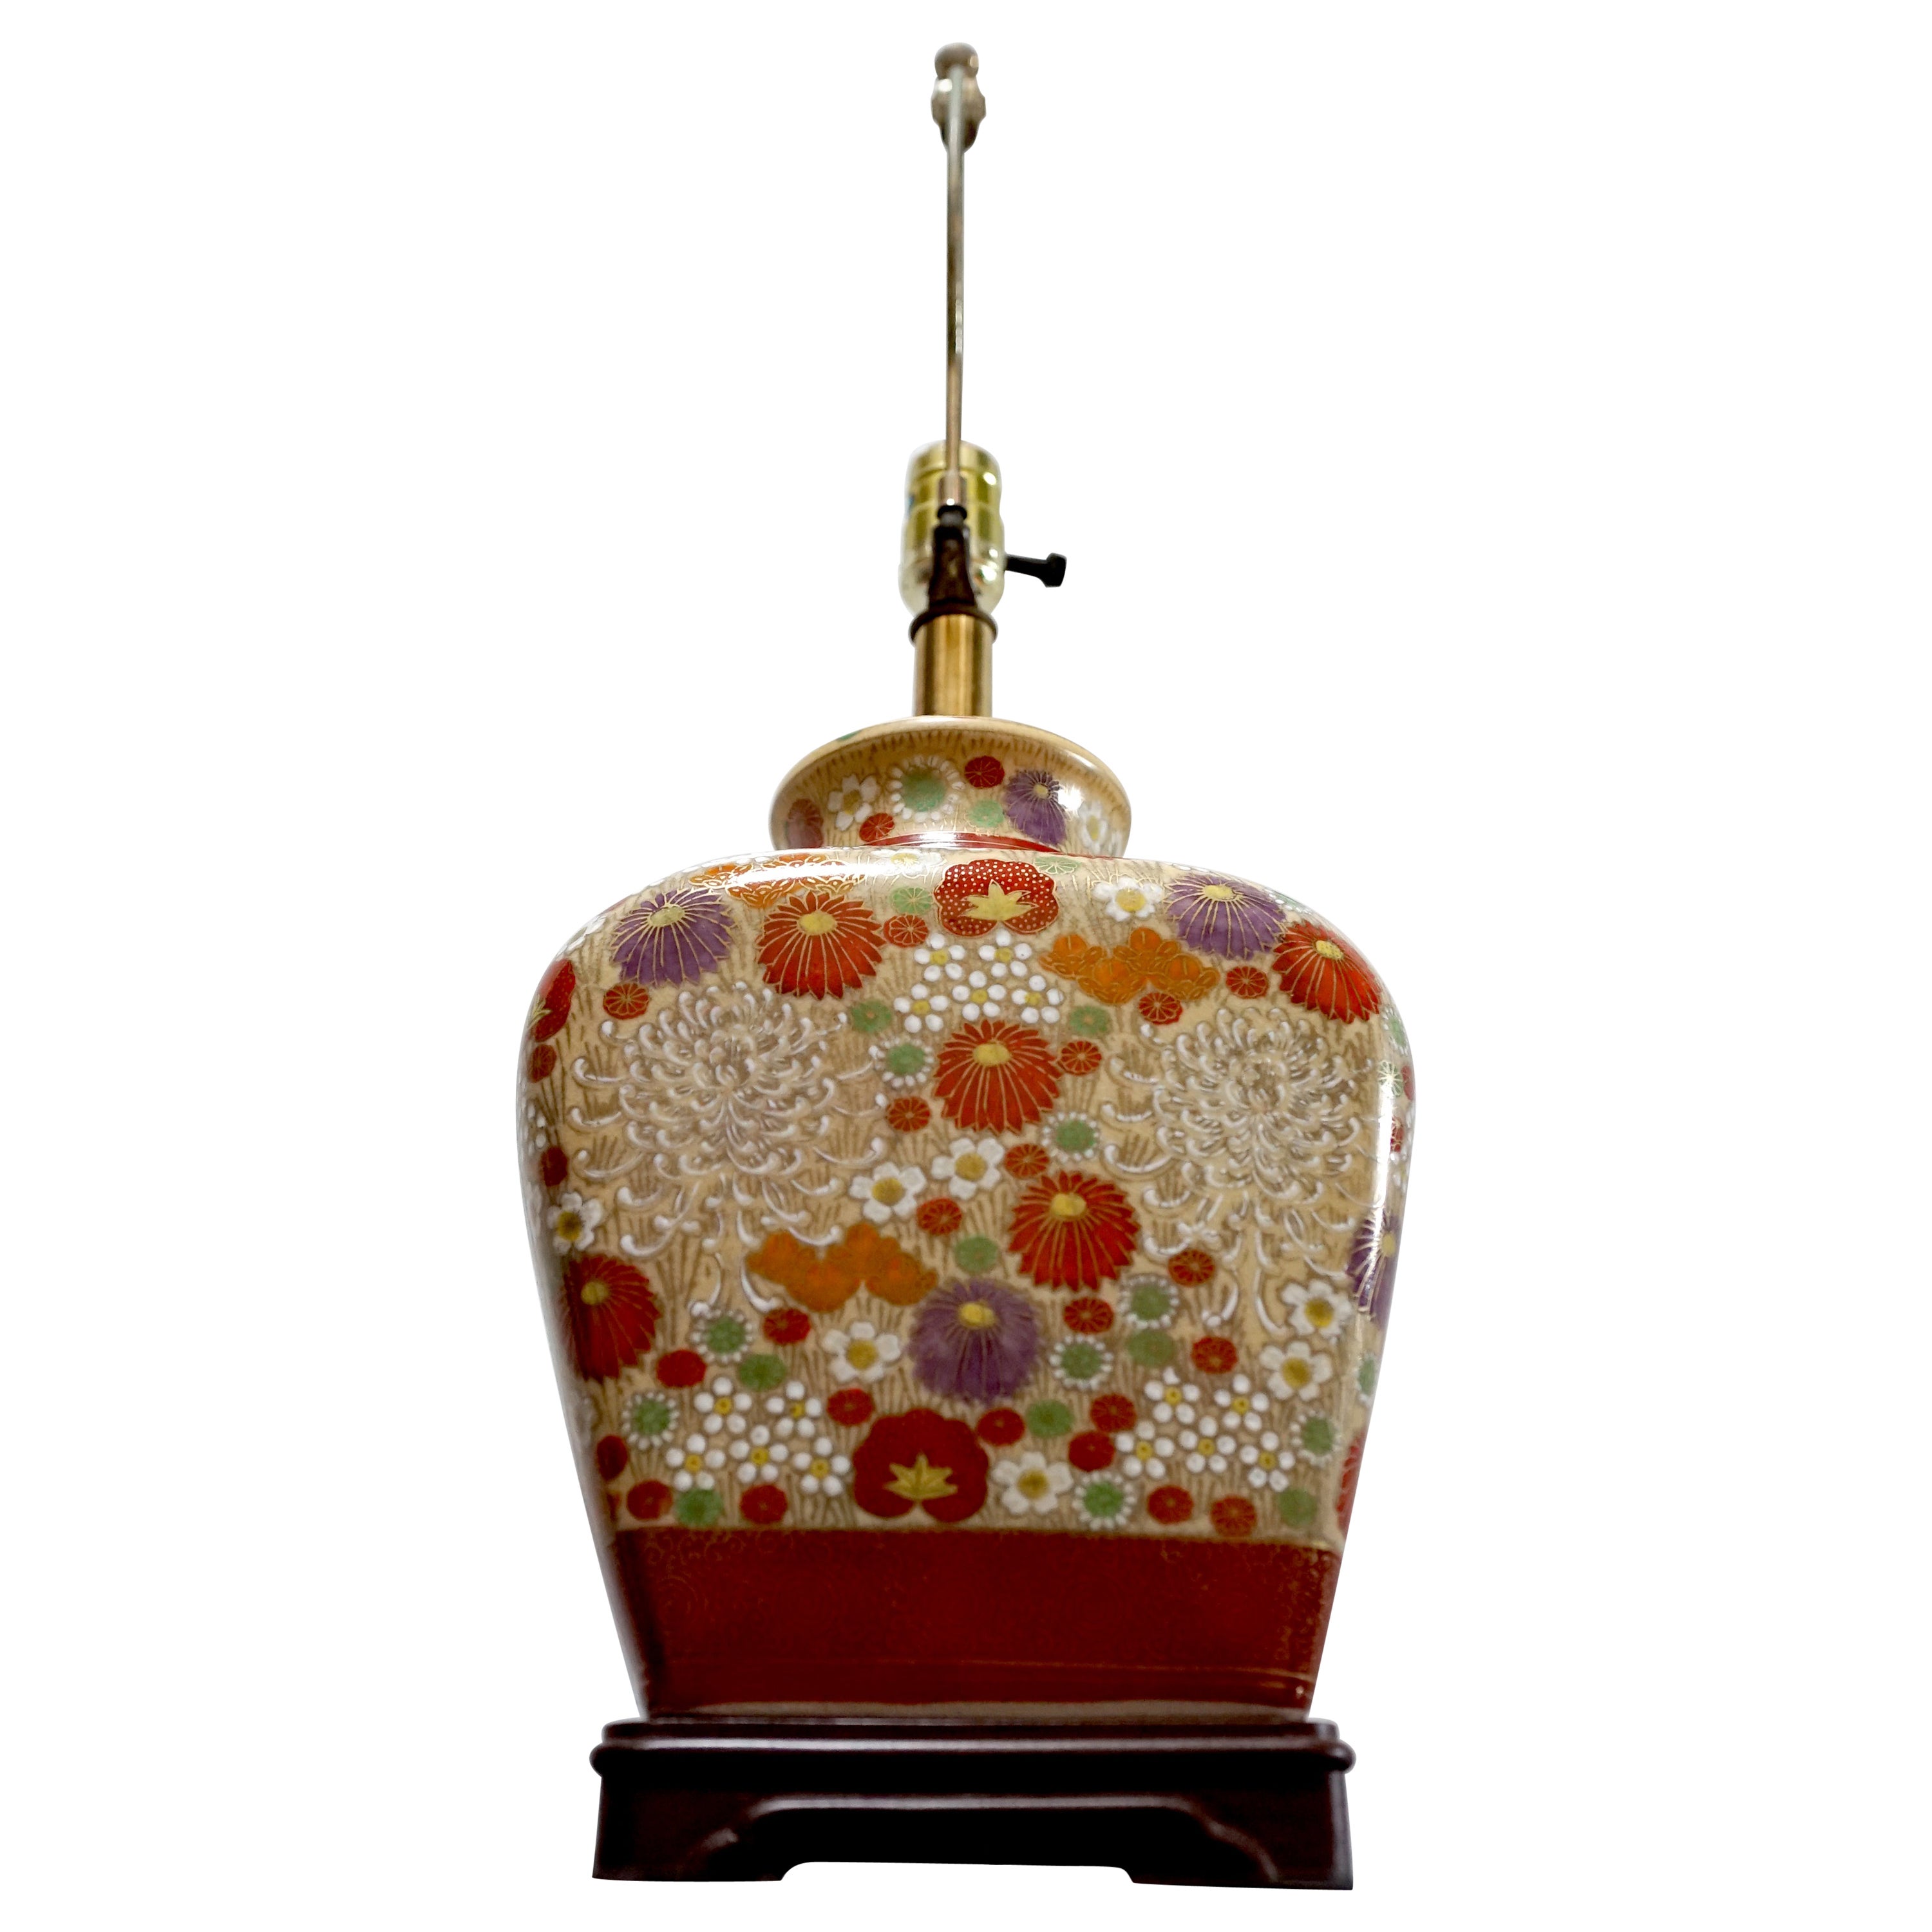 Asian Influenced Gilt Table Lamp with Profusion of Flowers, Rosewood Base